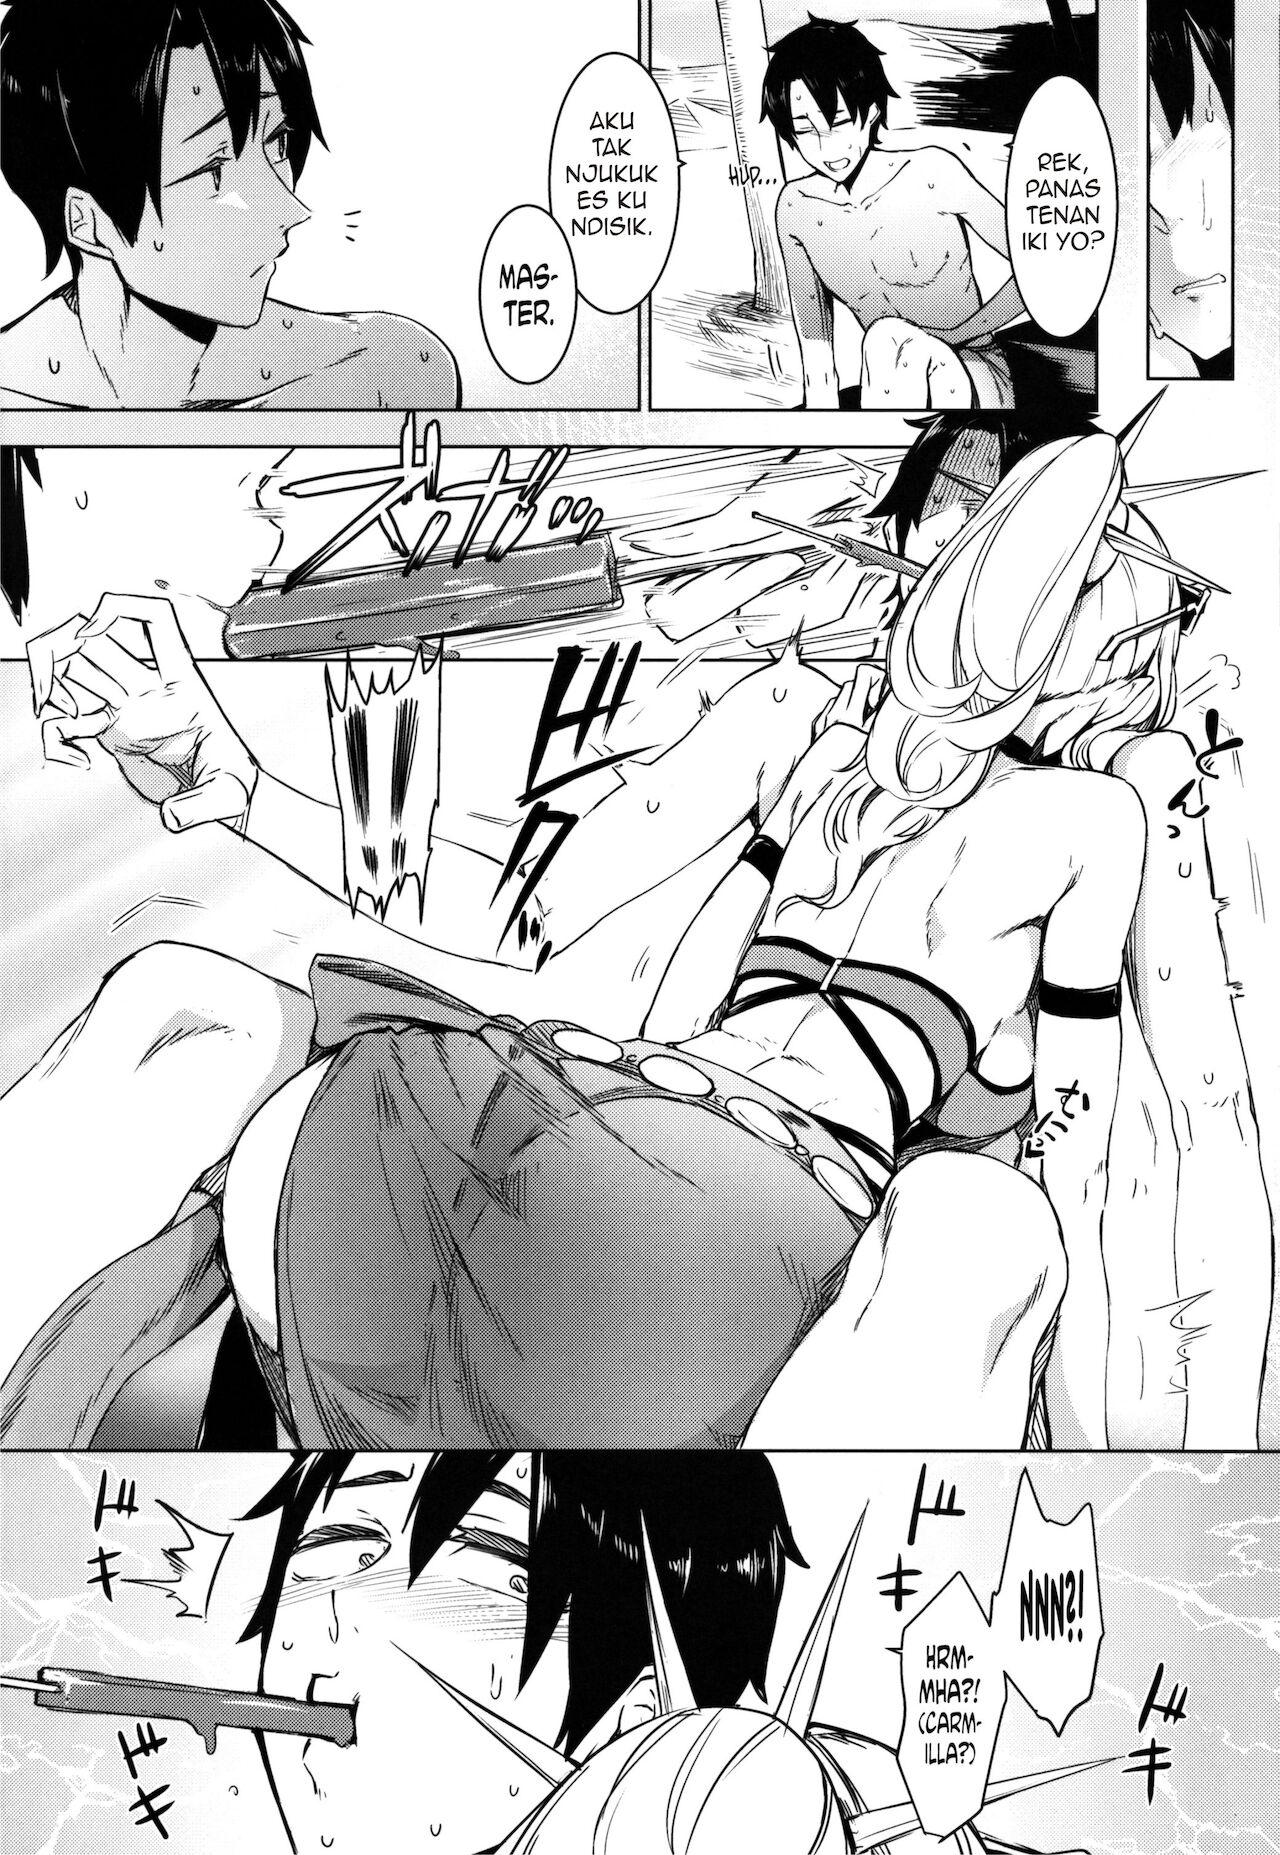 Best Blowjob Lust Vampire - Fate grand order Hot Wife - Page 8